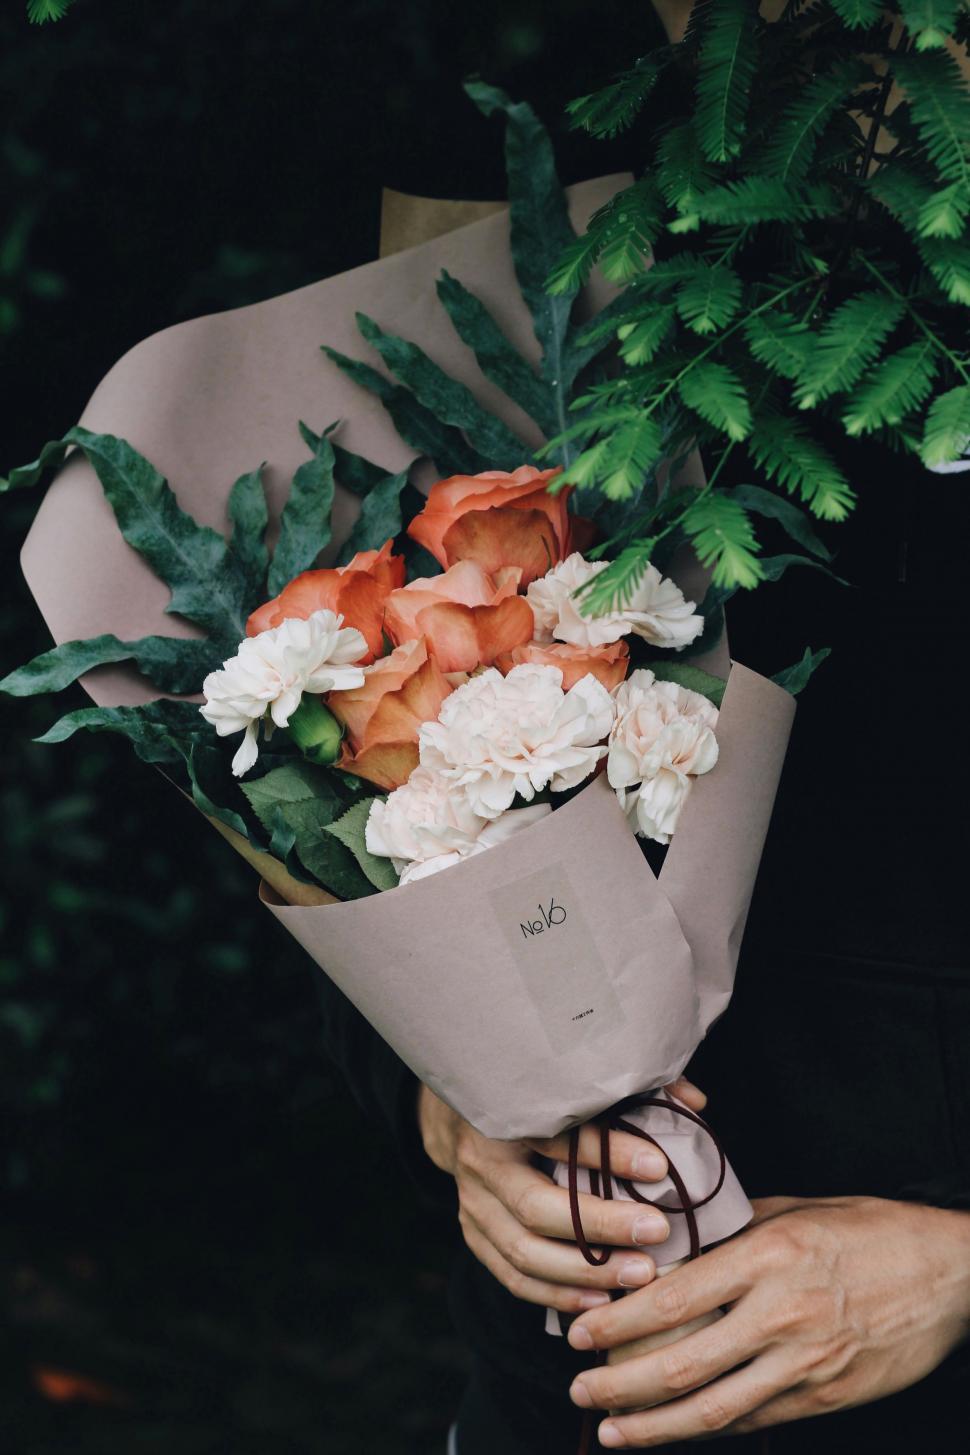 Free Image of Person Holding Bouquet of Flowers 